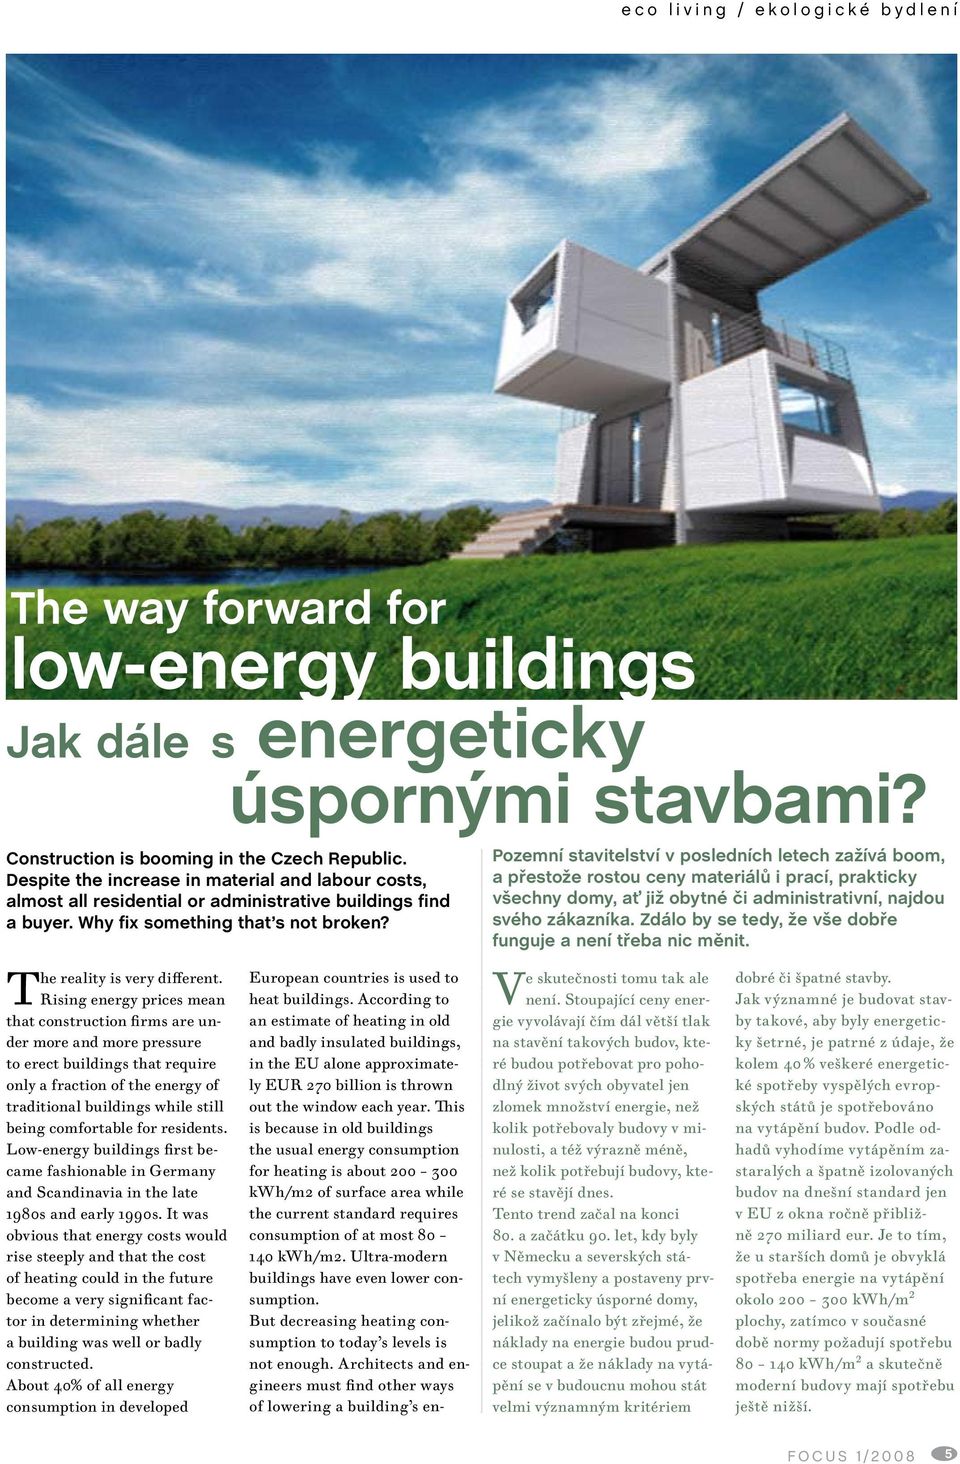 Rising energy prices mean that construction firms are under more and more pressure to erect buildings that require only a fraction of the energy of traditional buildings while still being comfortable